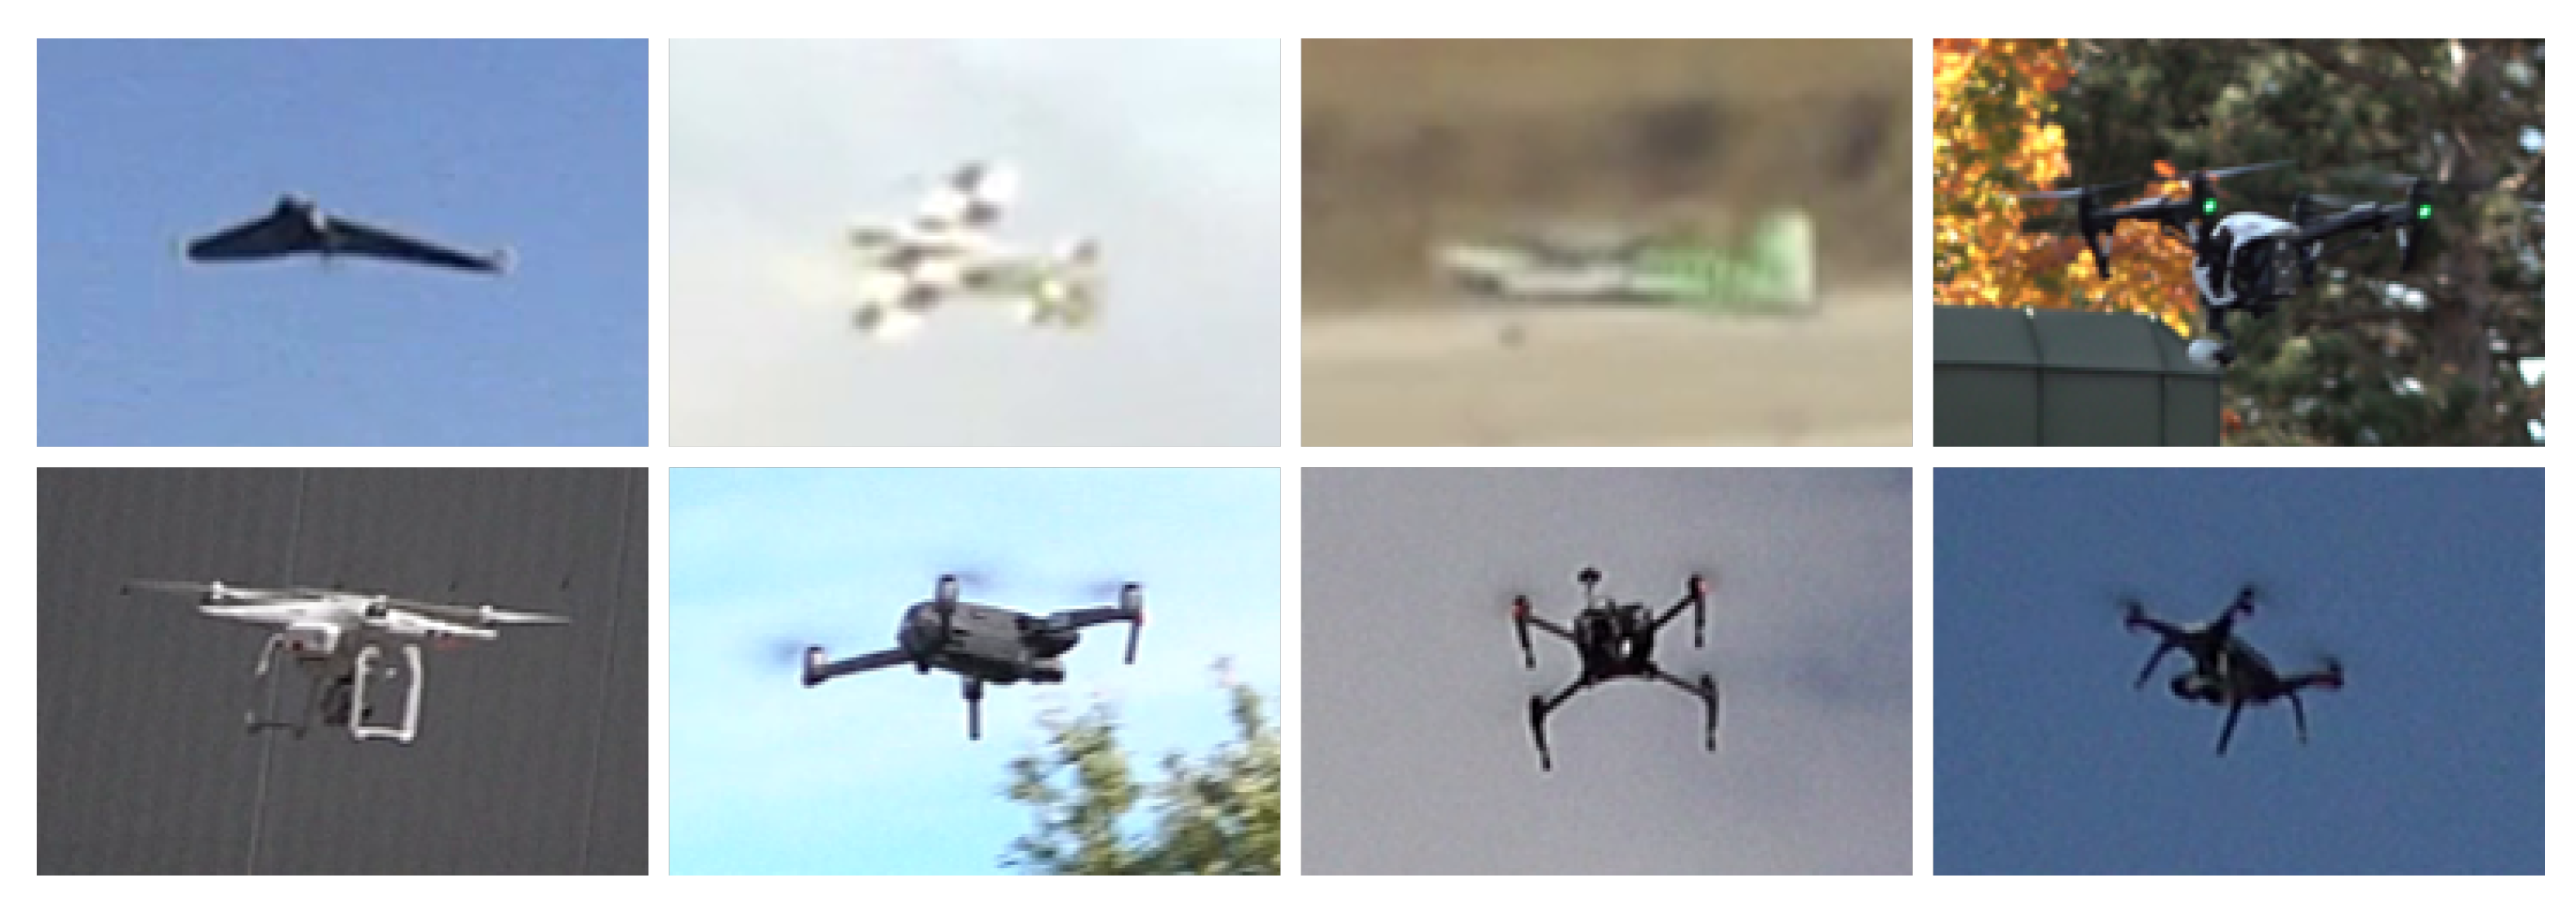 Sensors | Free Full-Text | Drone vs. Bird Detection: Deep Learning  Algorithms and Results from a Grand Challenge